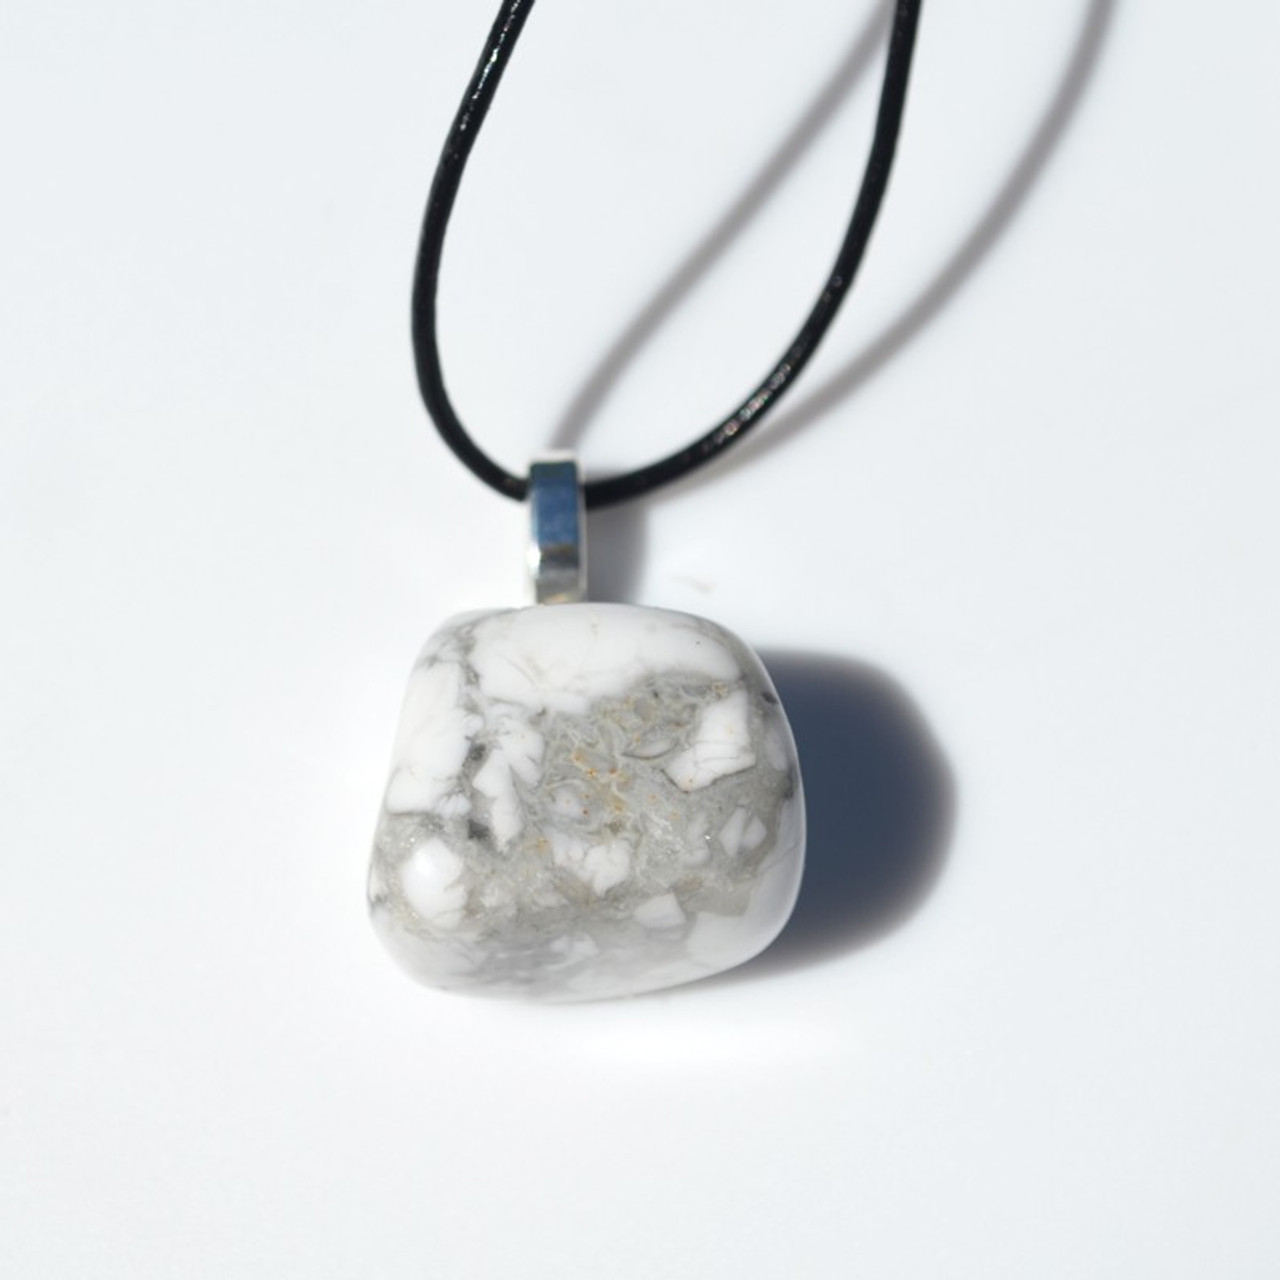 White Howlite Stone on a Leather Thong Necklace - Made to Order